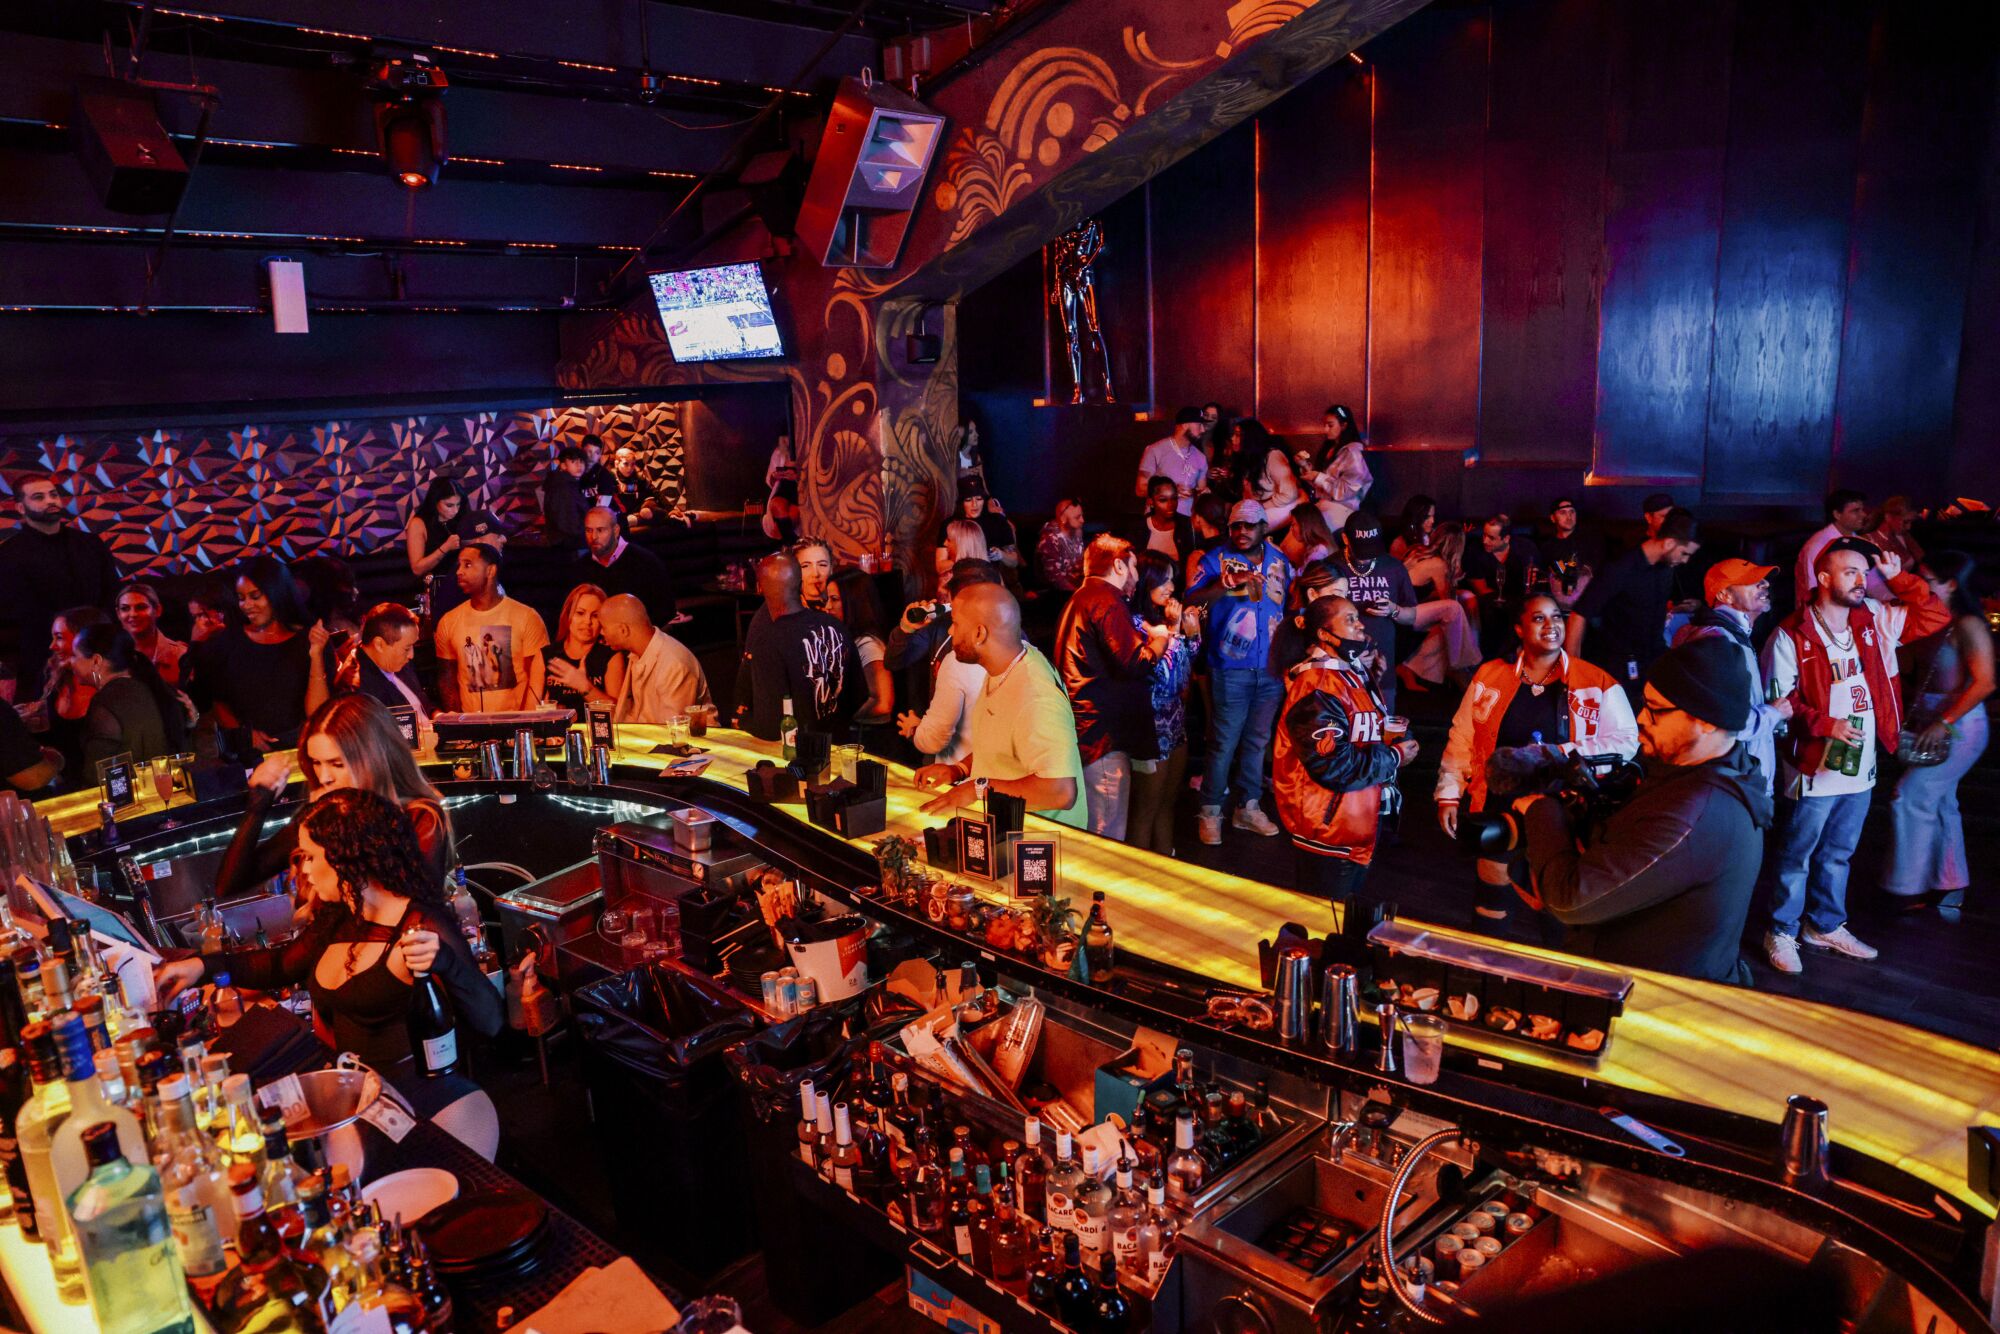 Fans crowd around the bar at a nightclub in the basement of the Miami Heat's arena. 